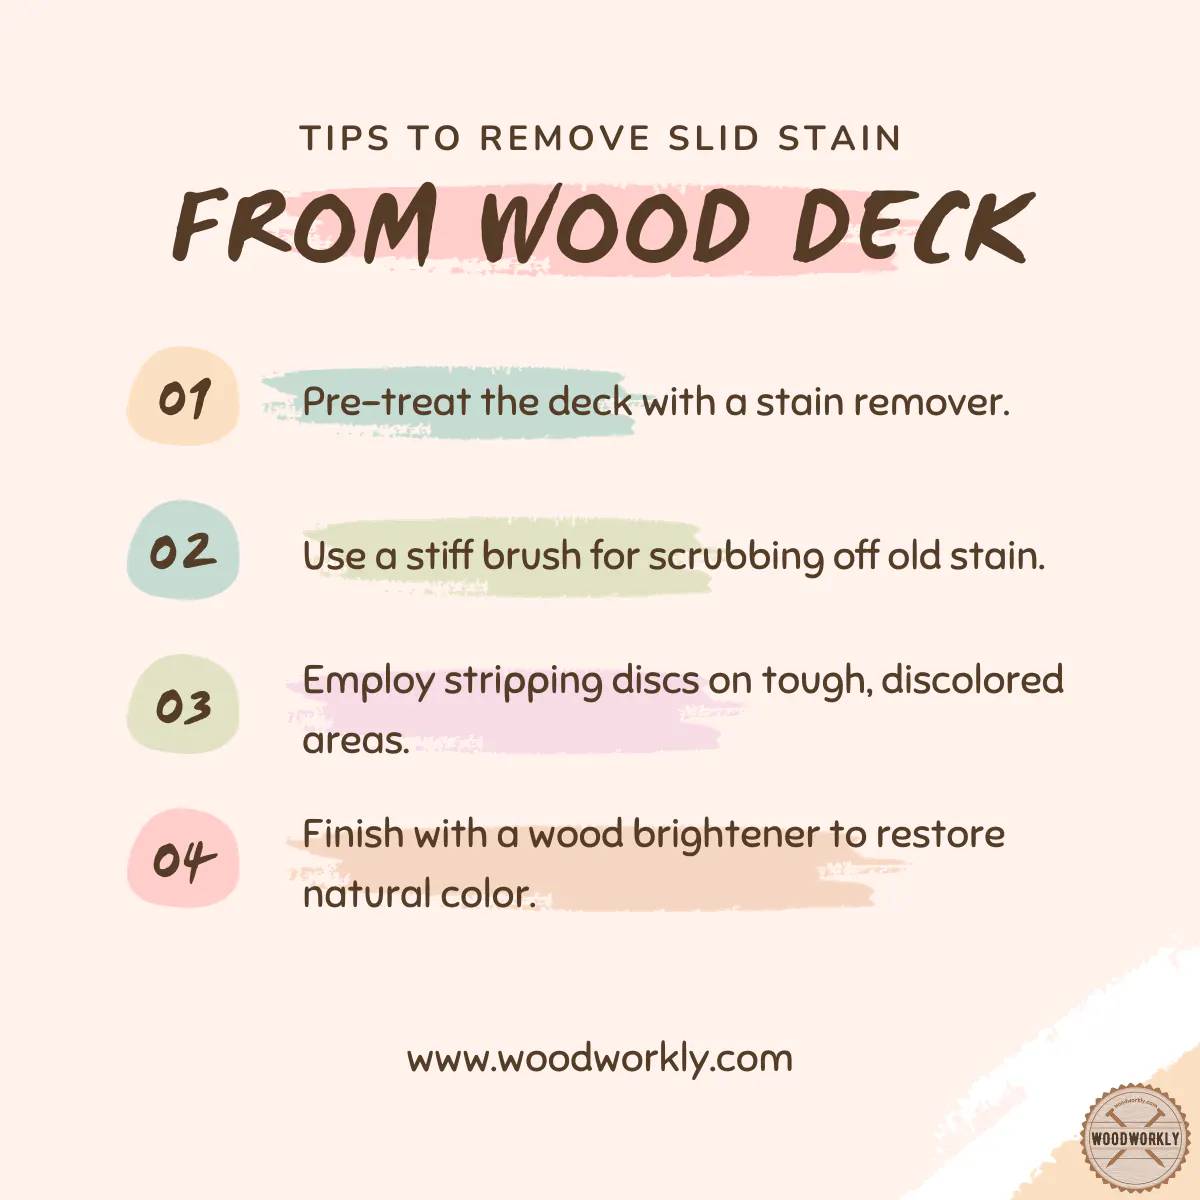 Tips to remove slid stain from a wood deck